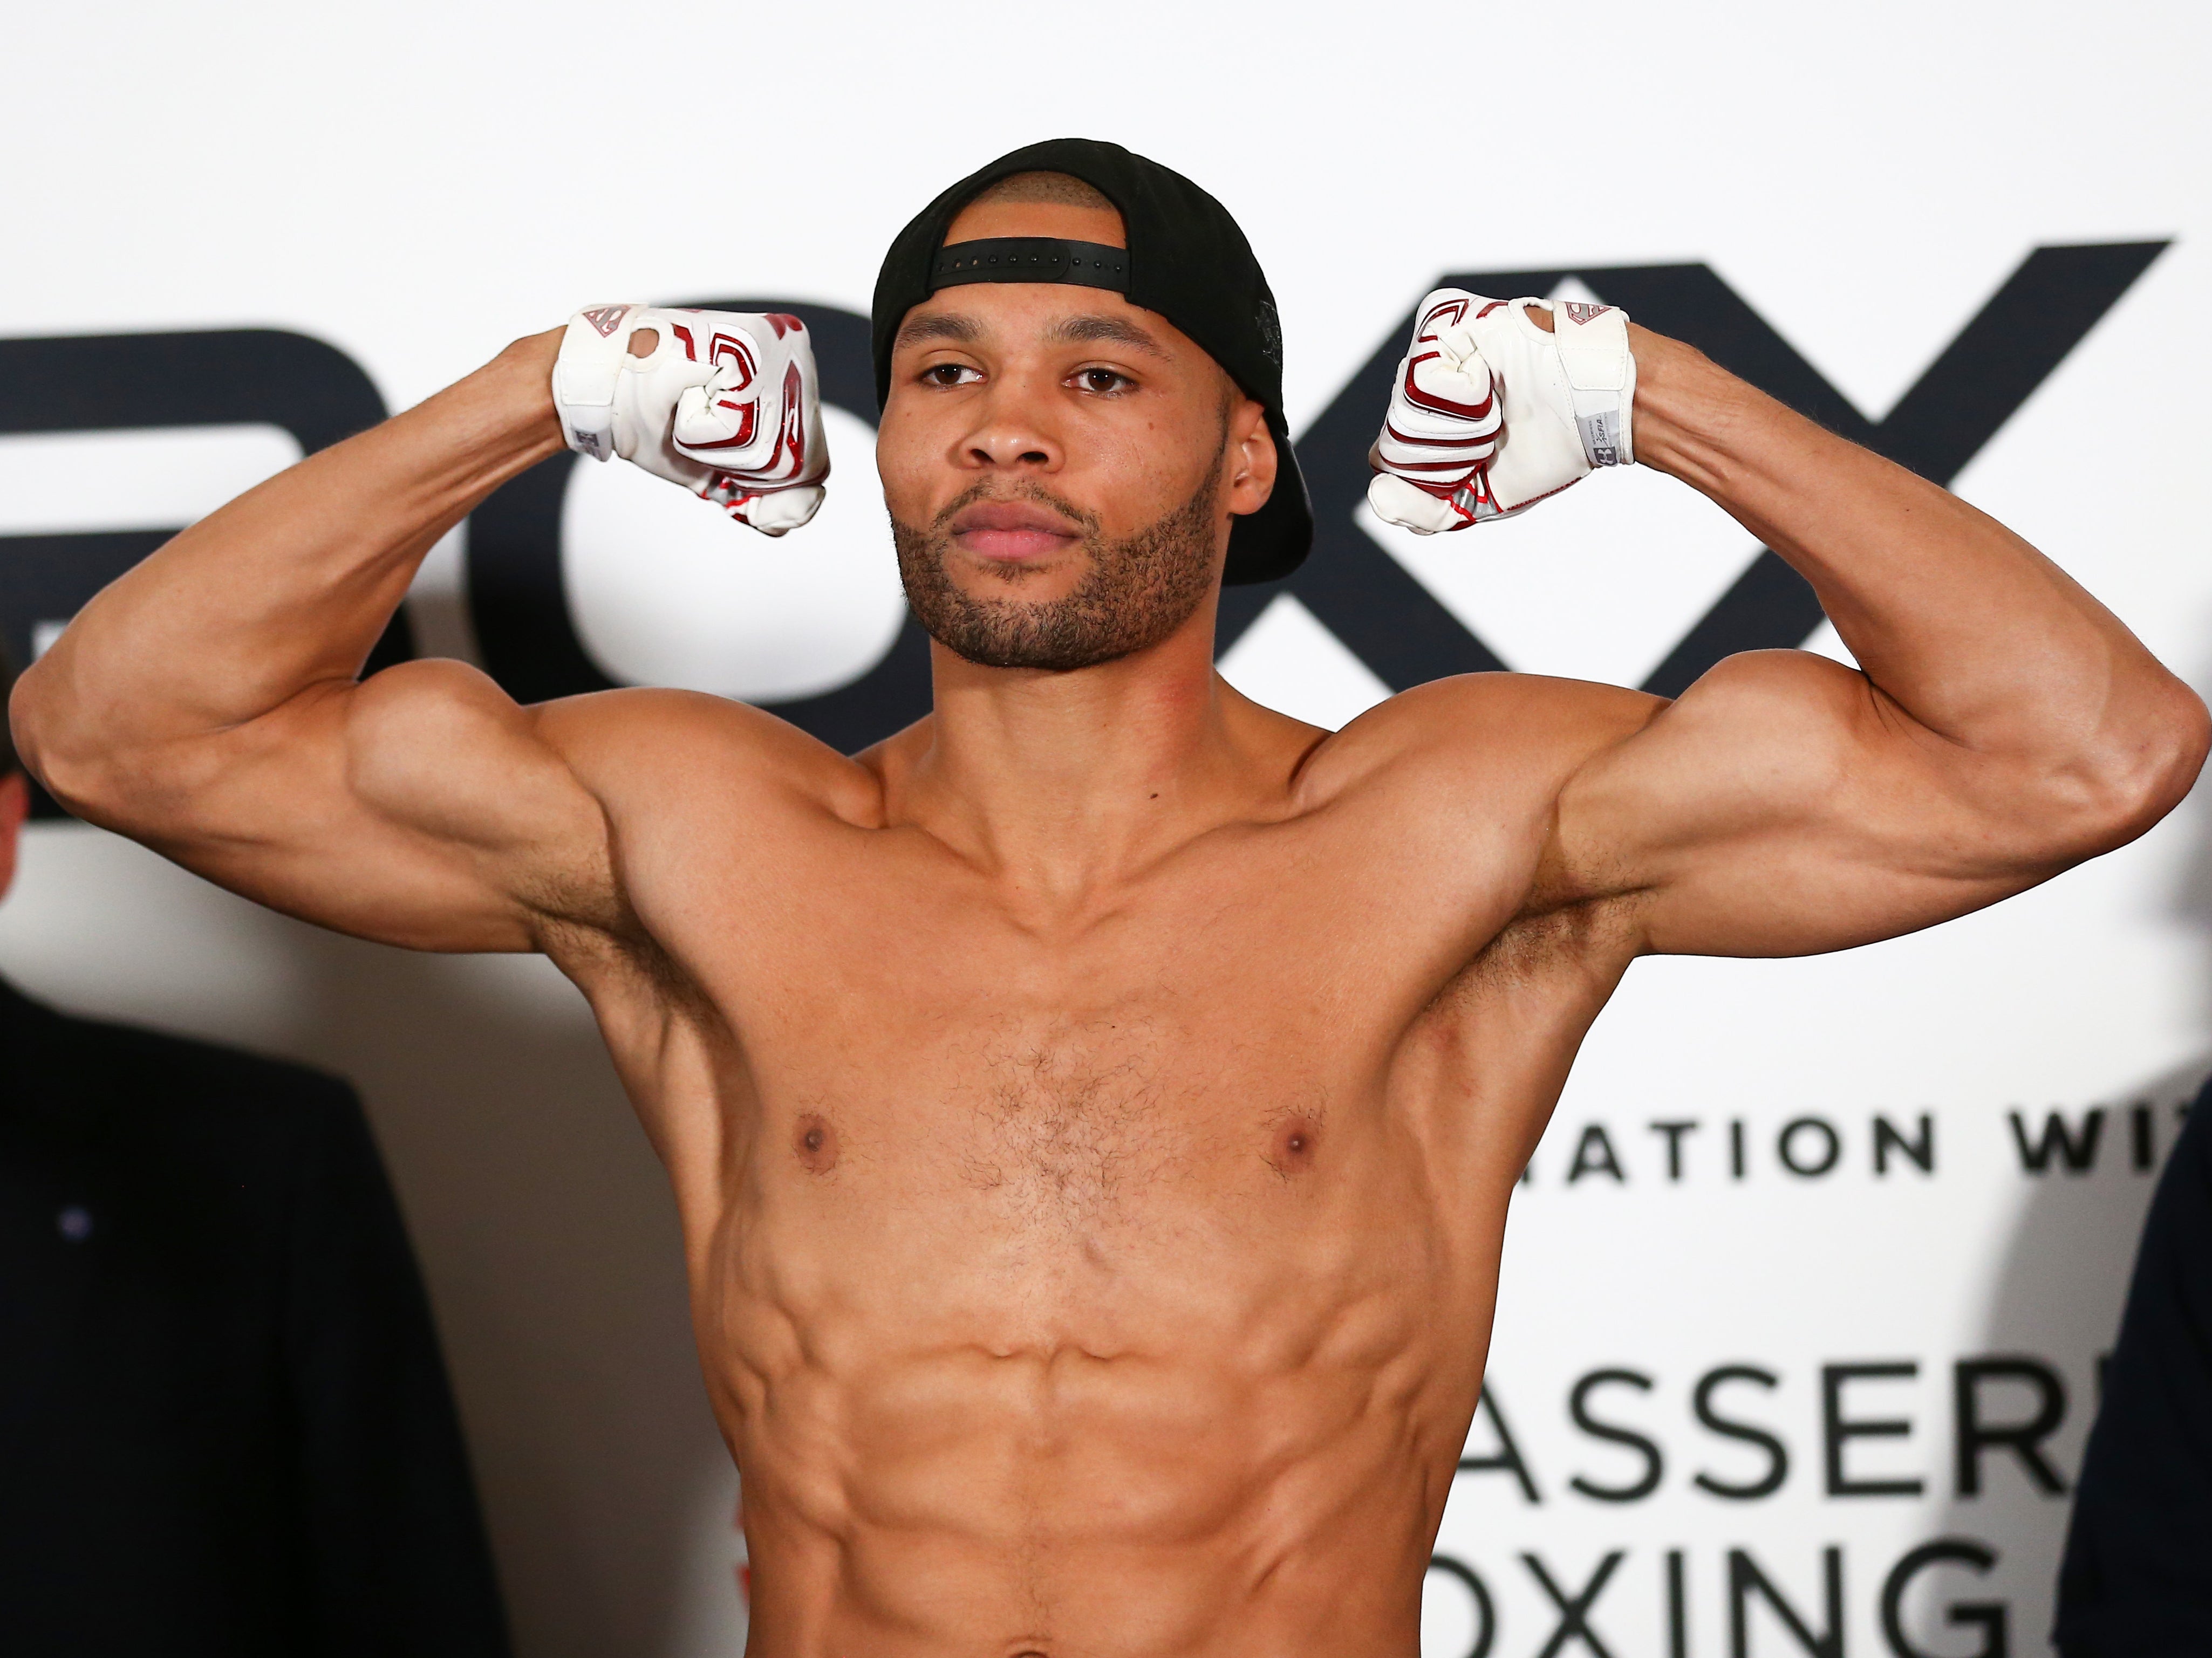 Chris Eubank Jr at the weighs-in before his now cancelled fight against Anatoli Muratov